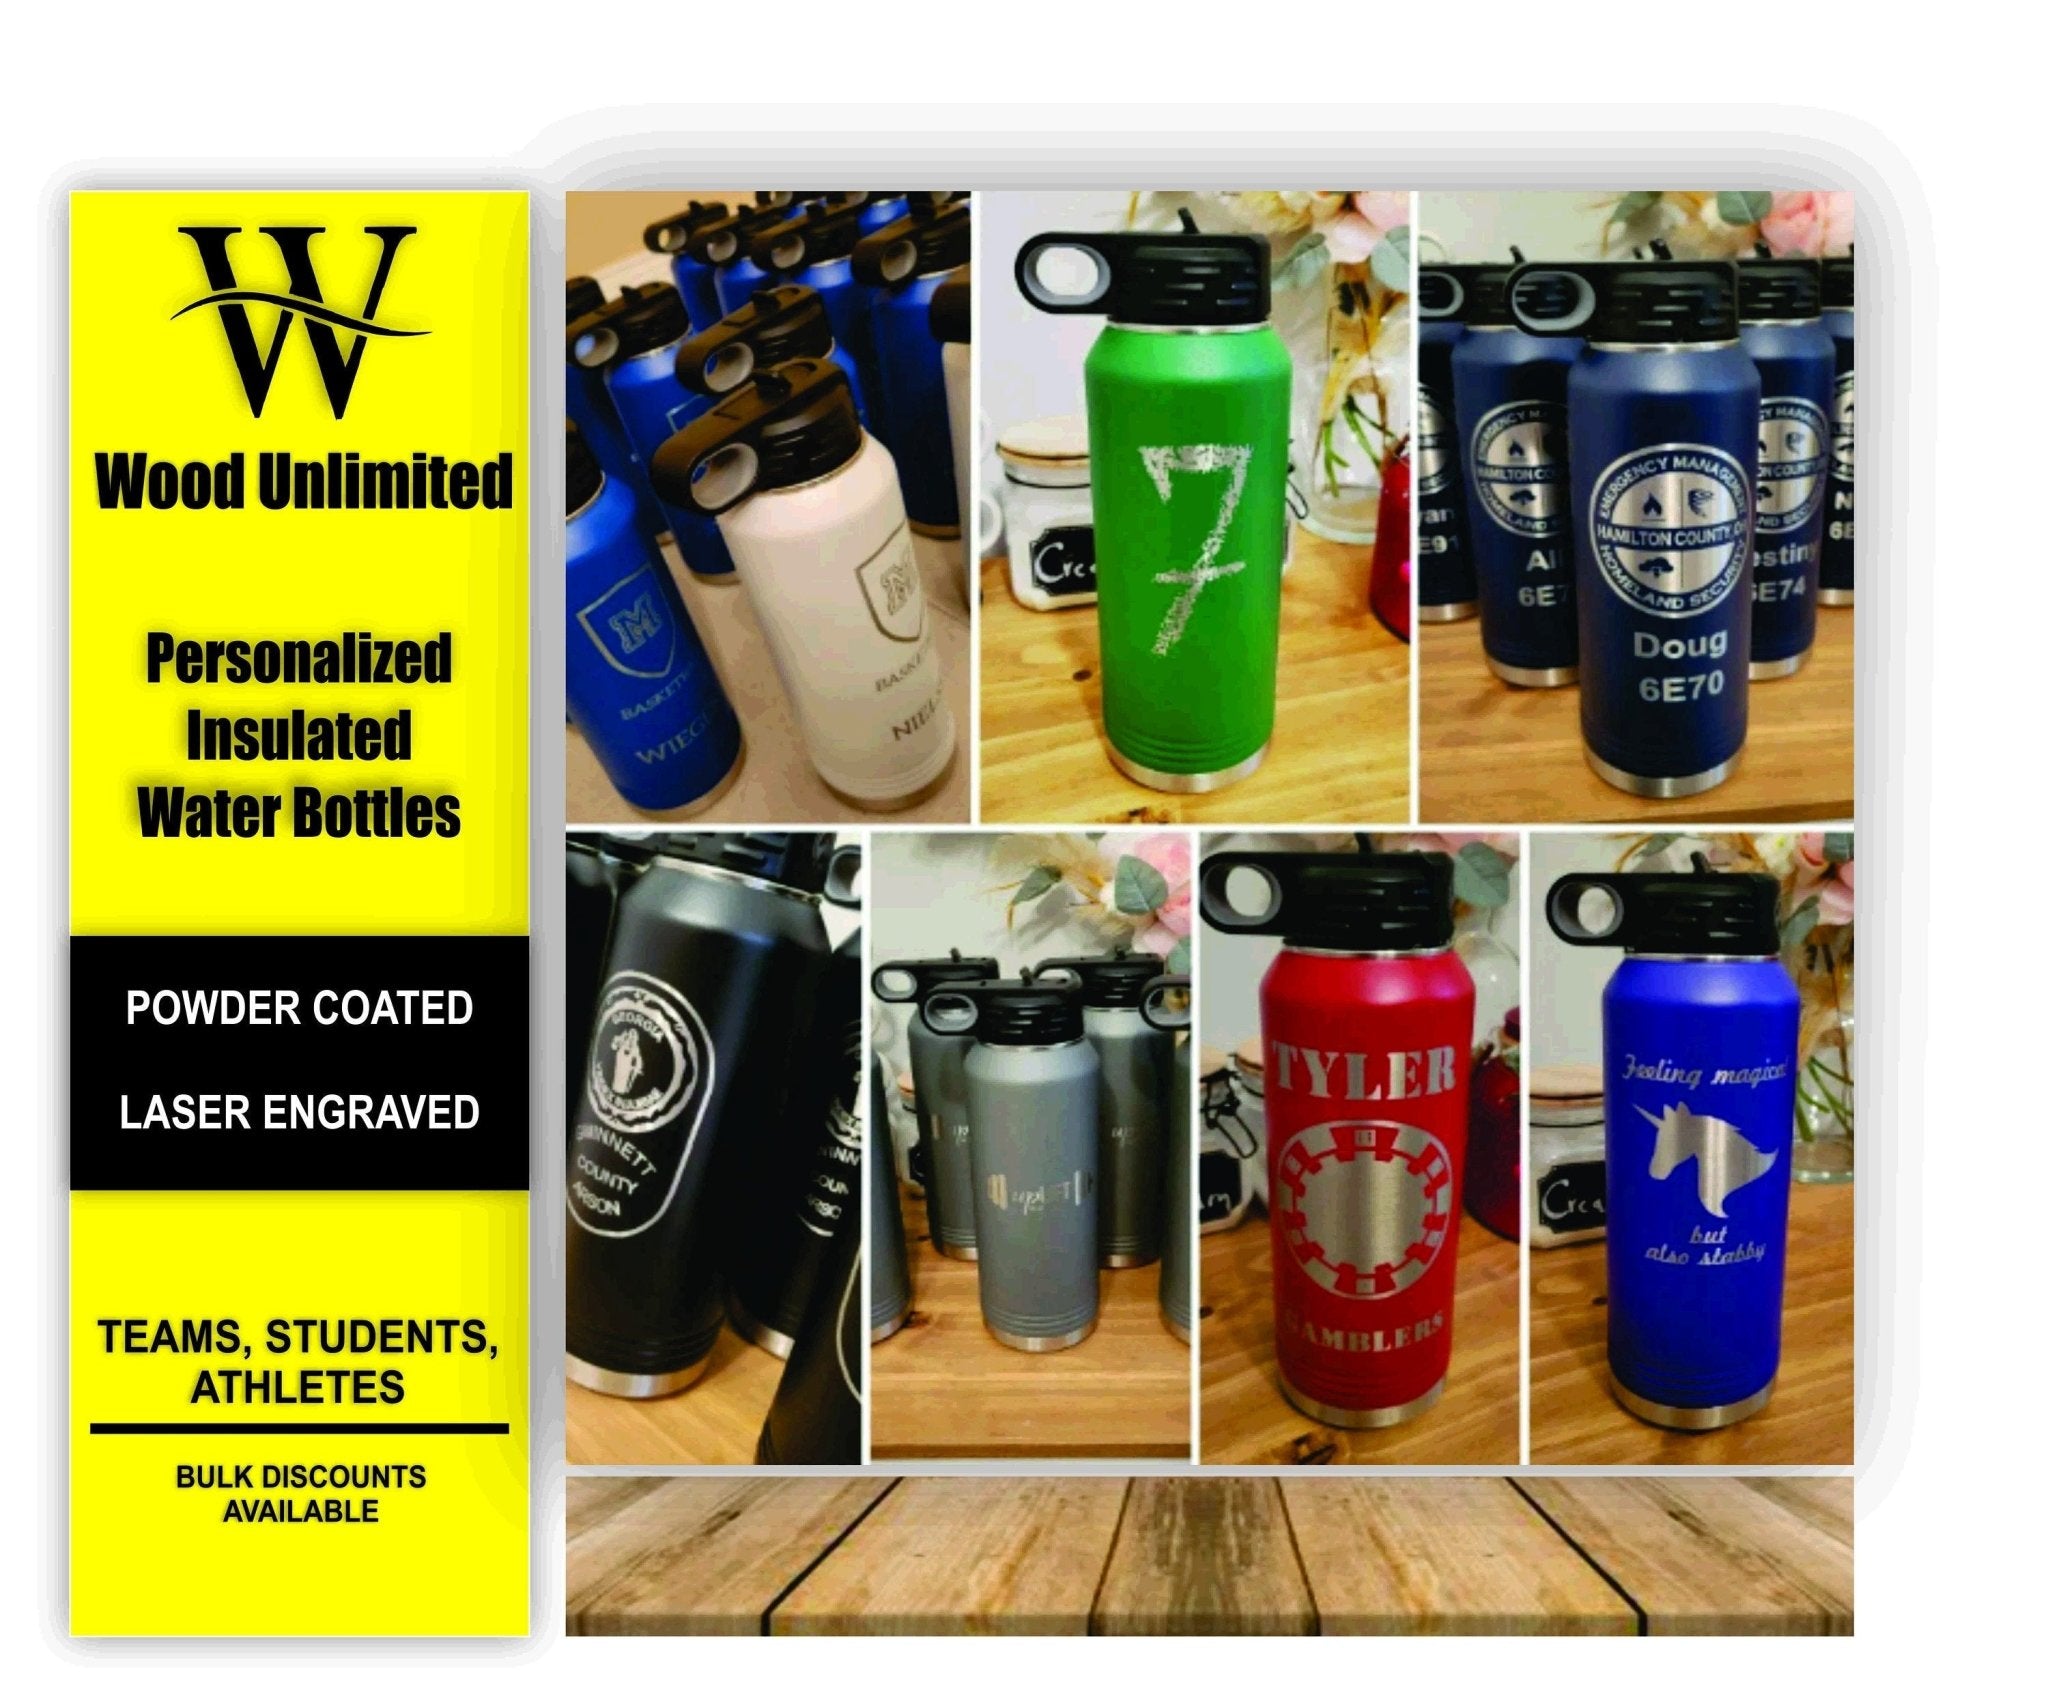 Personalized 32oz Water Bottle, Laser Engraved Bottle, Team Water Bottles,  Branded, Bulk Water Bottles, ADD YOUR LOGO or Text - Wood Unlimited